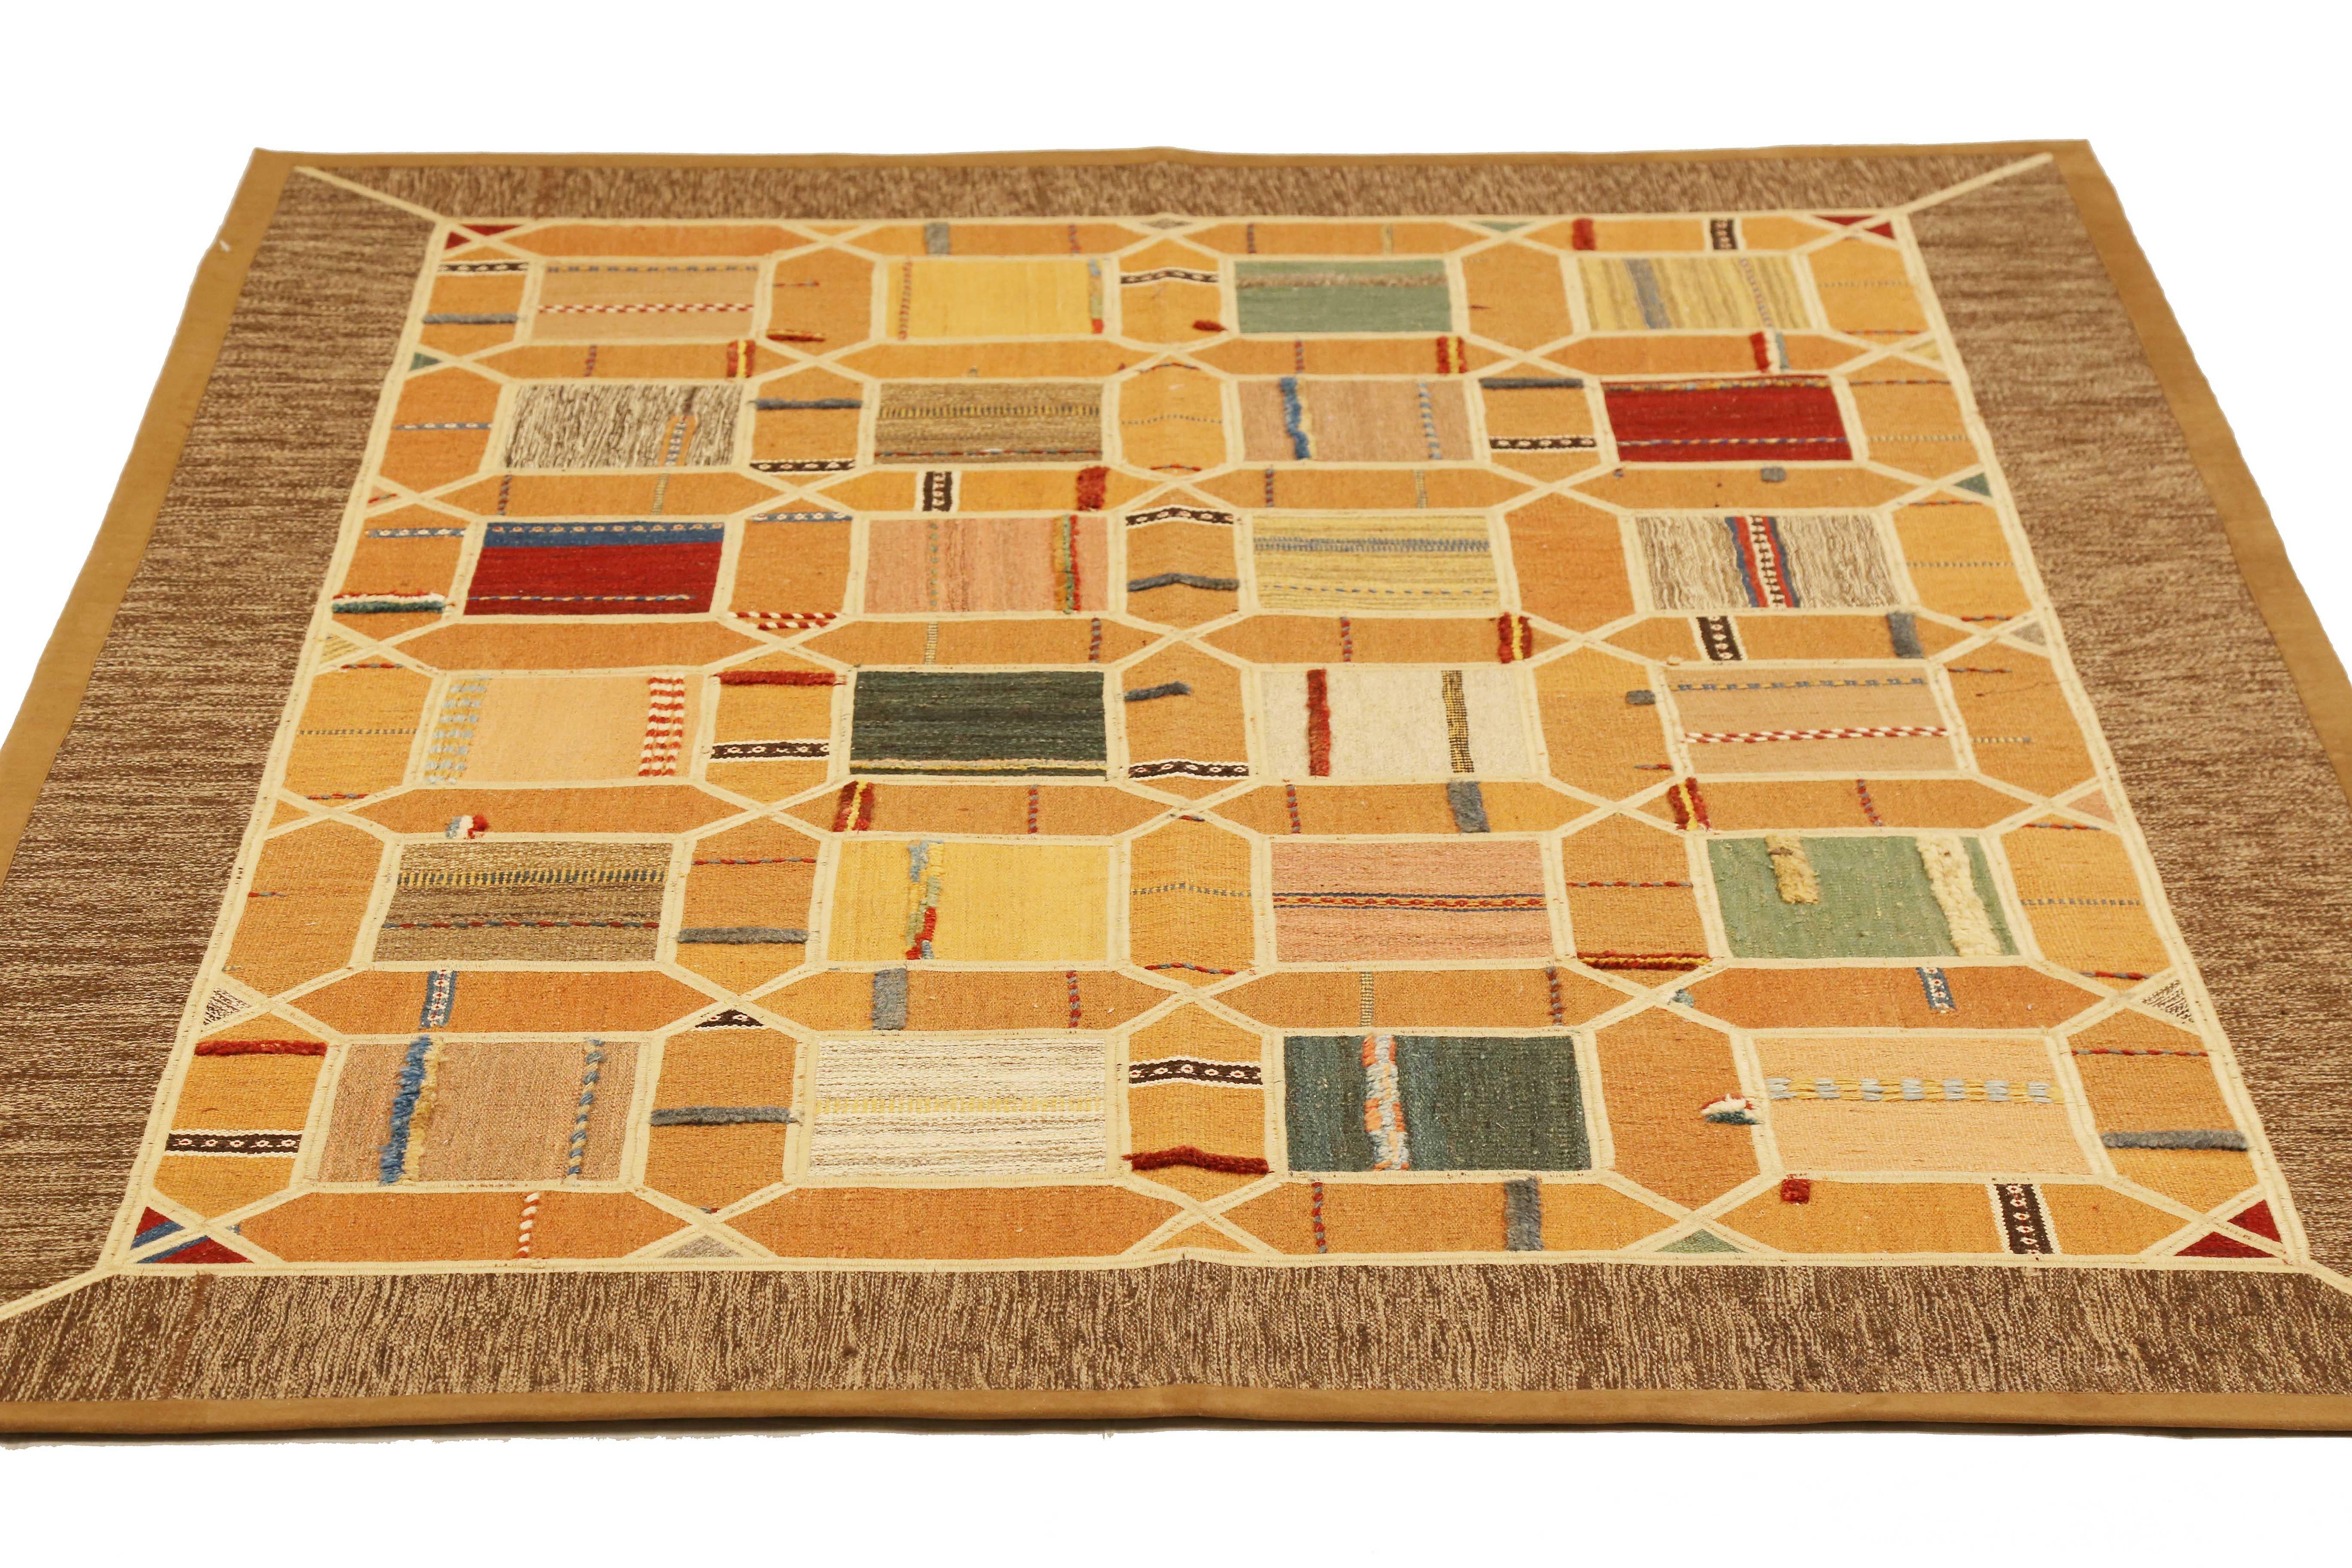 Modern Turkish rug handwoven from the finest sheep’s wool and colored with all-natural vegetable dyes that are safe for humans and pets. It’s a traditional Patch Kilim flat-weave design featuring colored tiles mixed with geometric details. It’s a